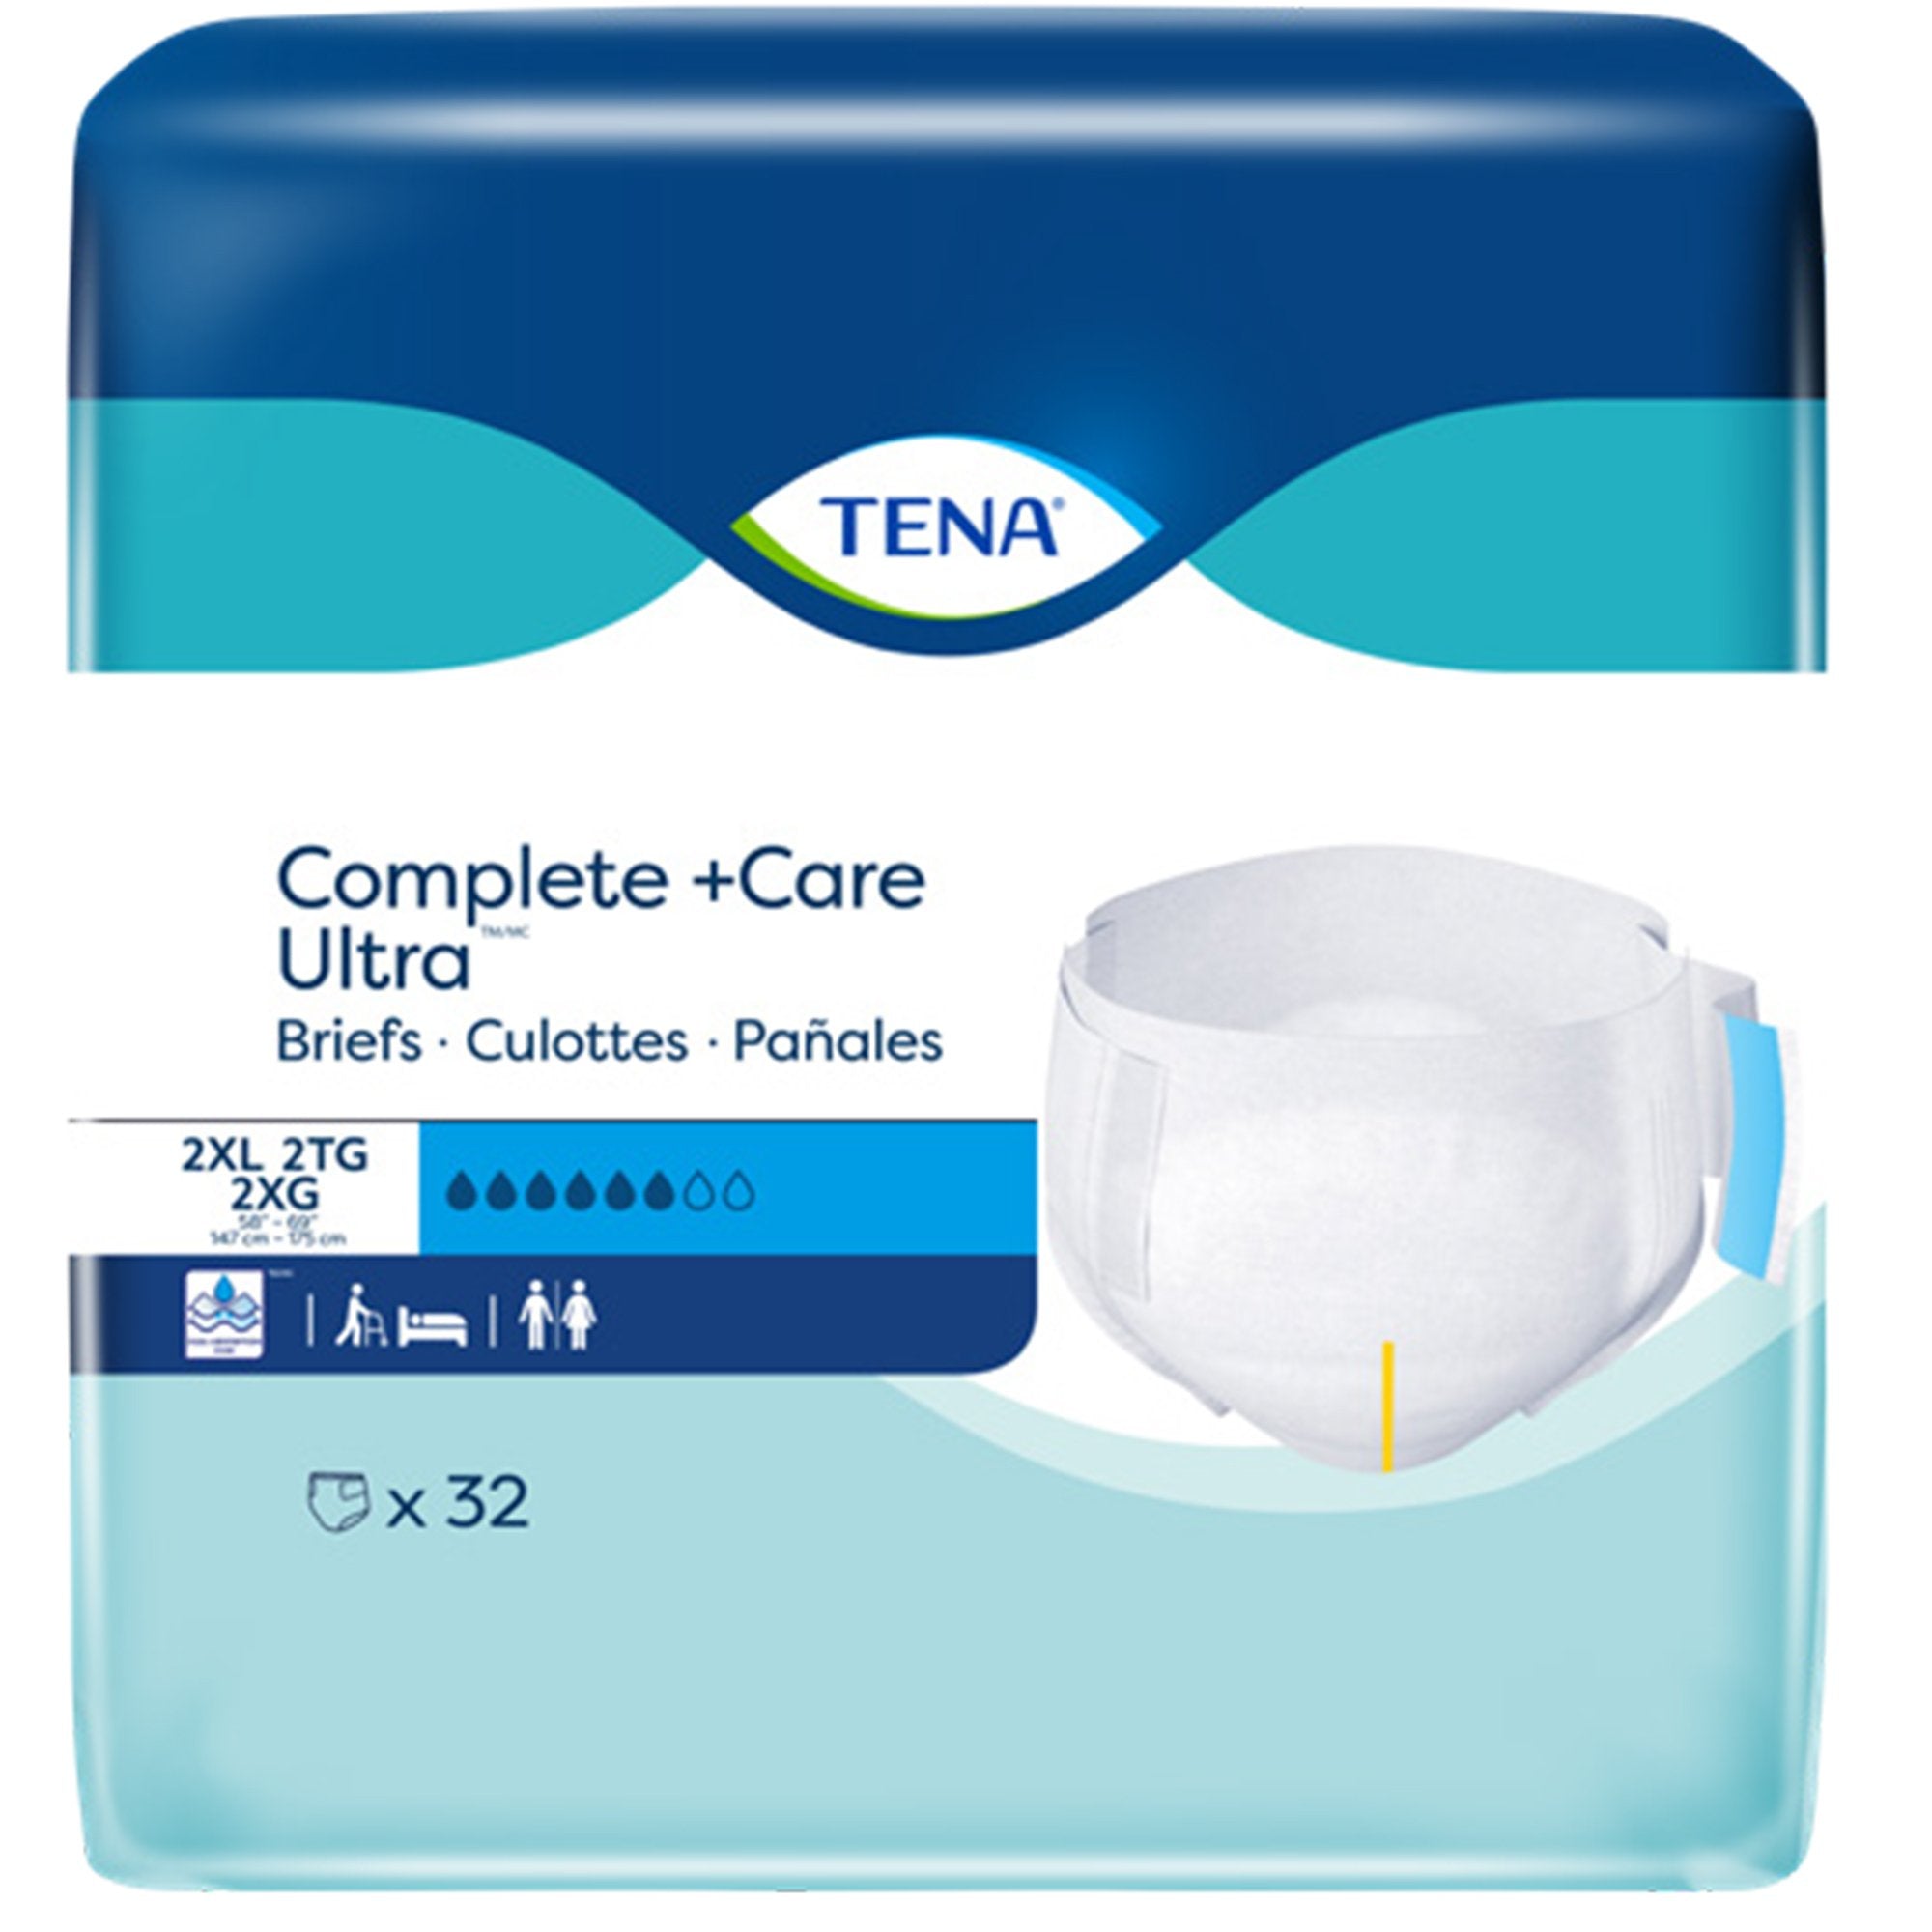 TENA Complete +Care Ultra™ Incontinence Brief, 2X-Large | Pack-32 | 1198444_PK